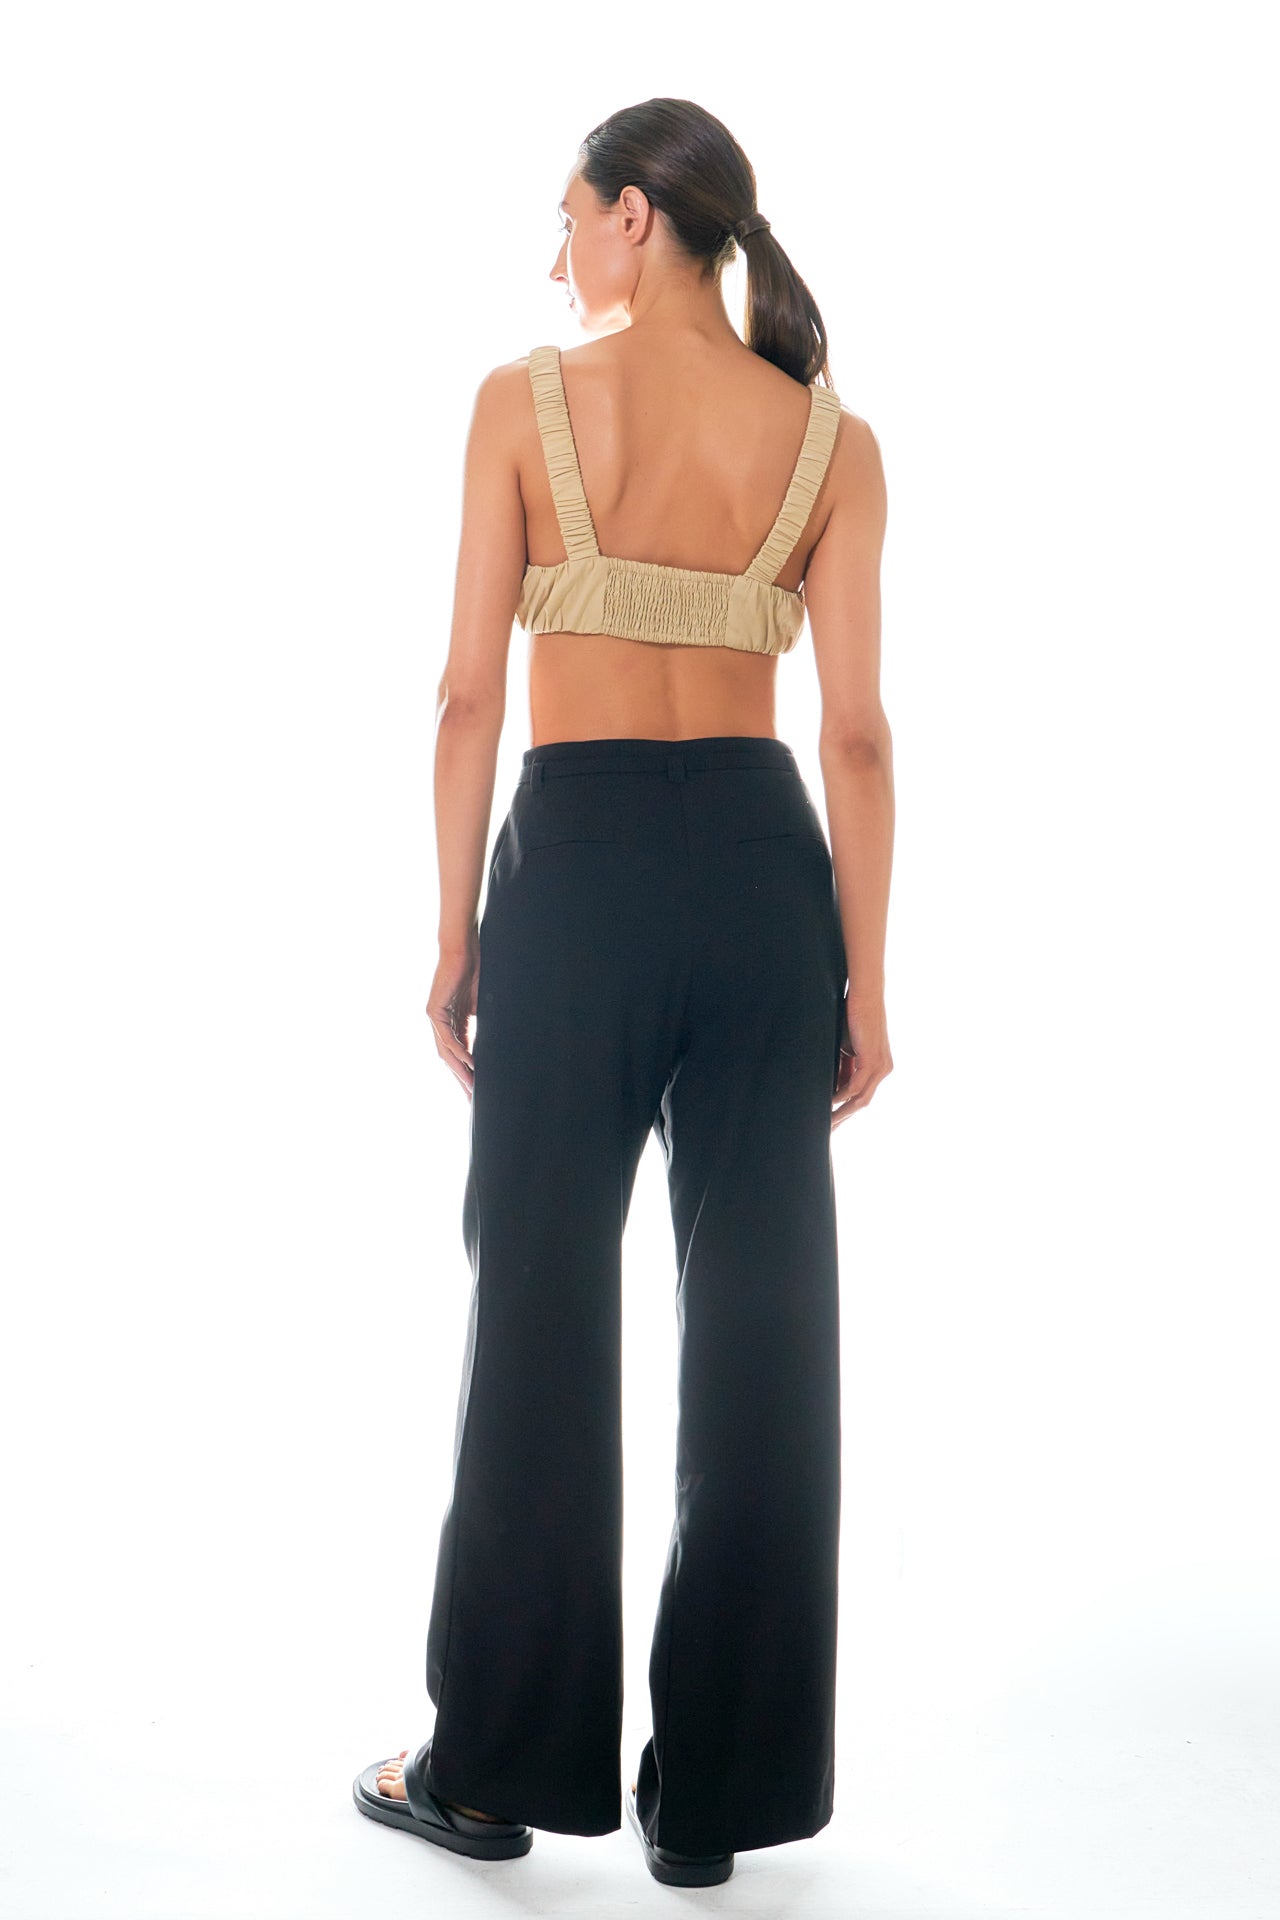 GREY LAB - Pleated Wide Pants with Belt - PANTS available at Objectrare